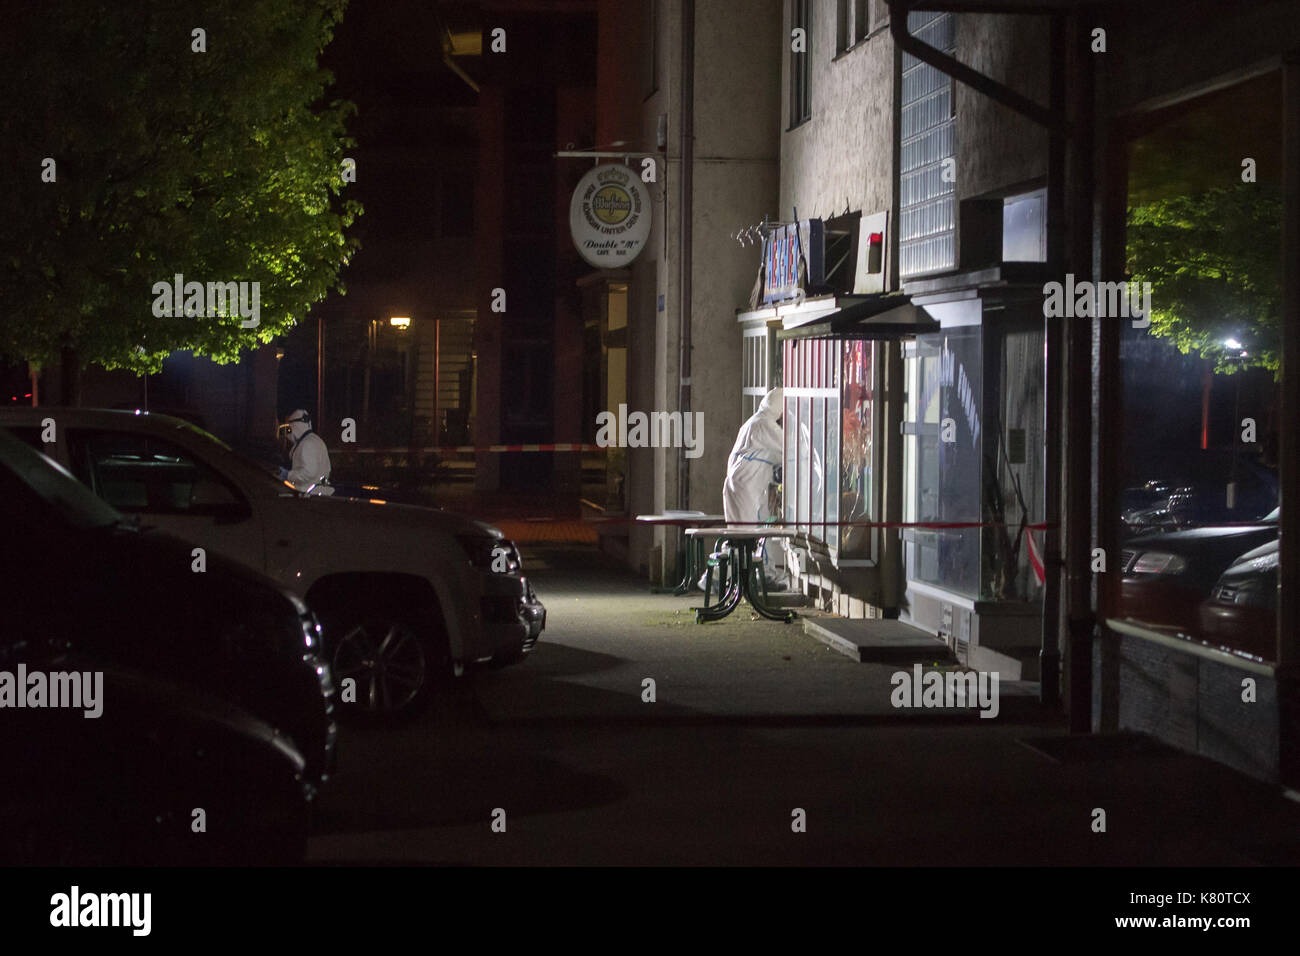 Traunreut, Germany. 17th Sep, 2017. Police crime scene investigators enter a bar in Traunreut, Germany, 17 September 2017. A man opened fire in a bar, leaving two dead and two severely injured. Photo: Tobias Hase/dpa/Alamy Live News Stock Photo